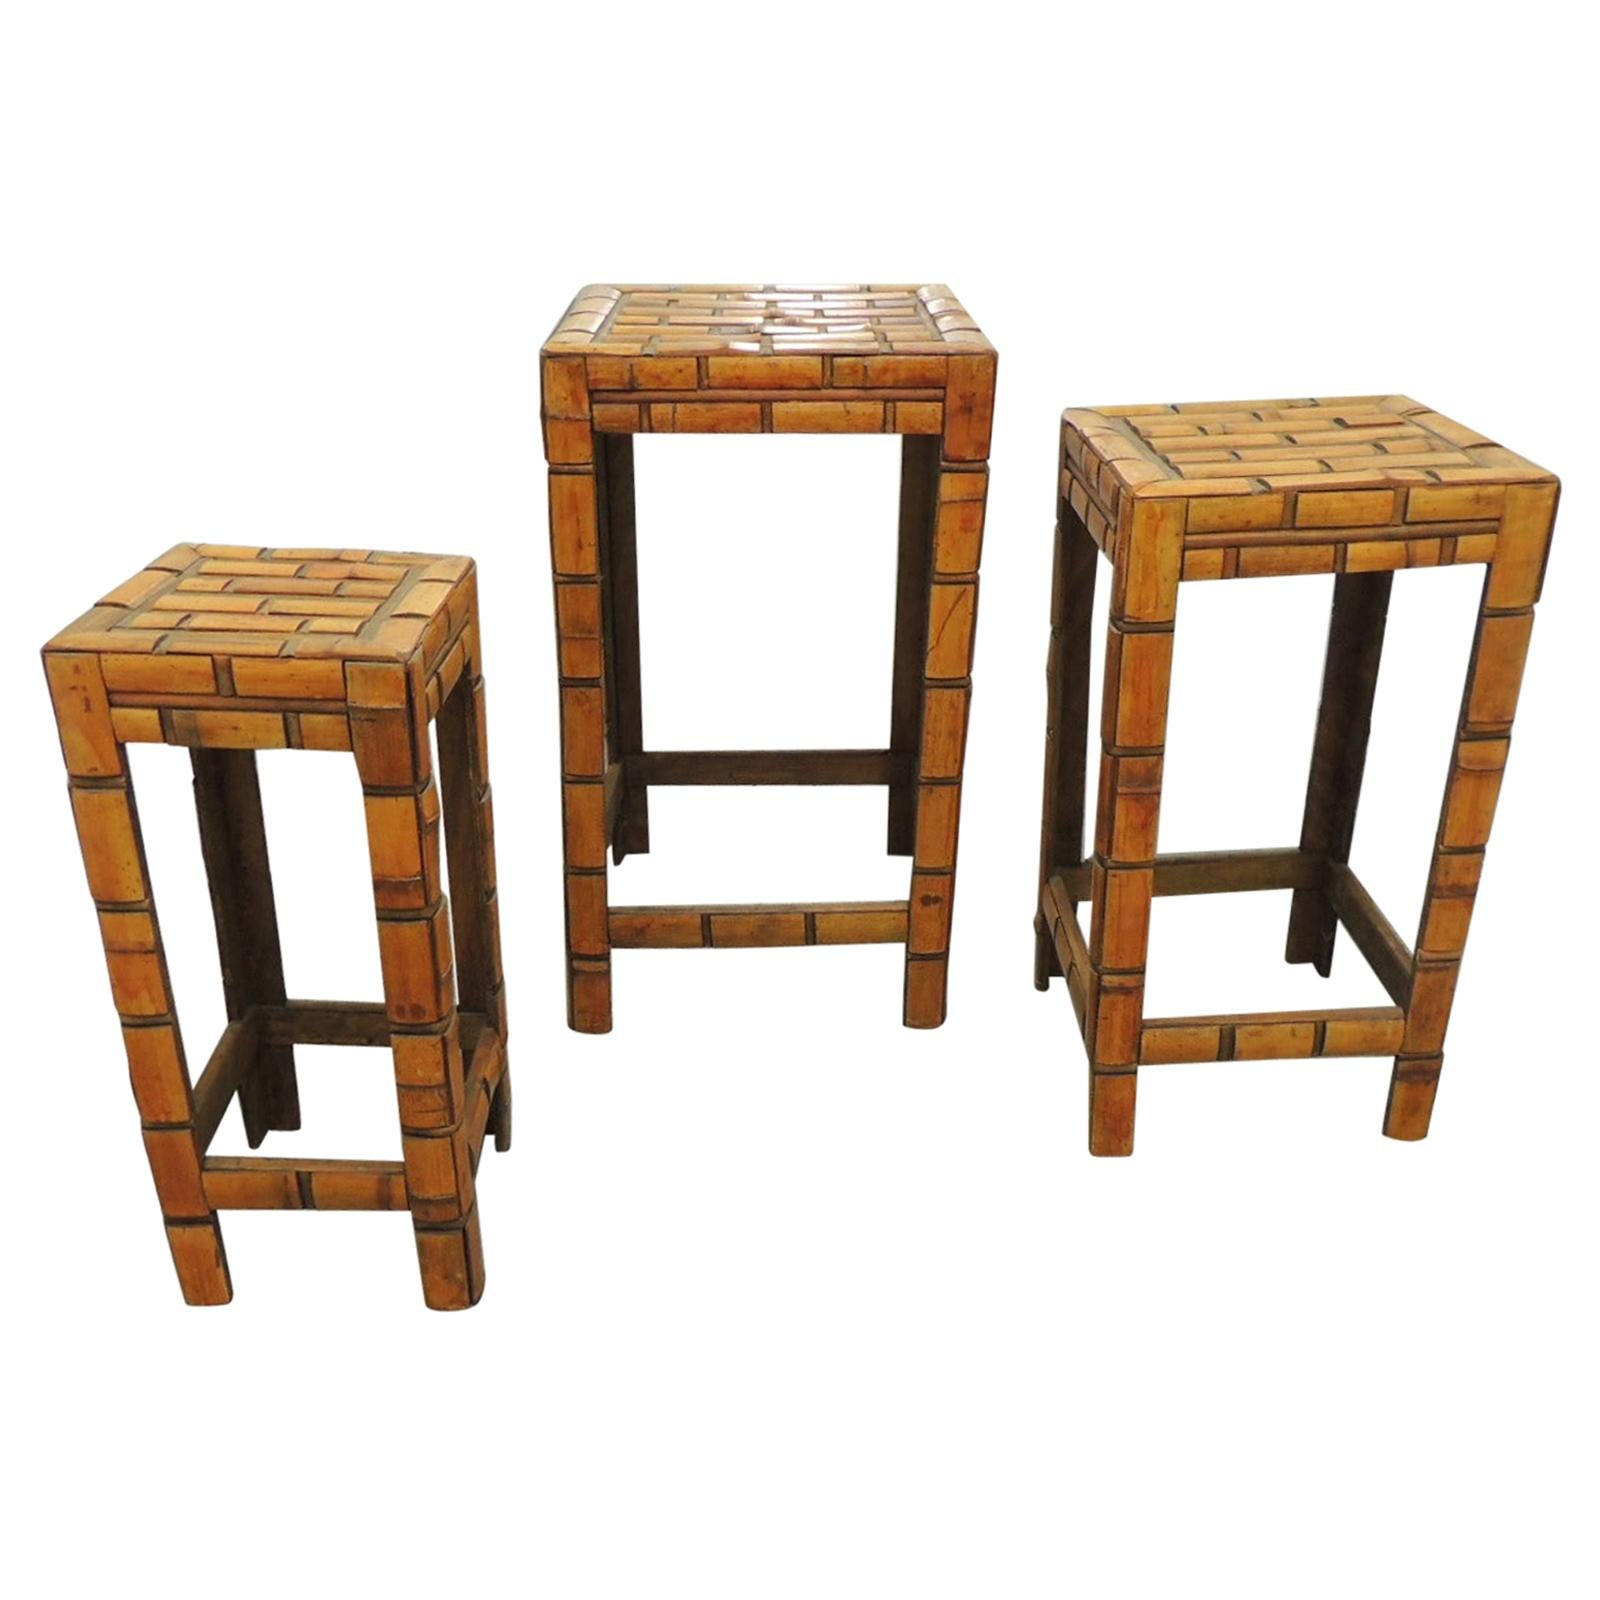 Set of '3' Slatted Asian Bamboo Stackable Side Tables